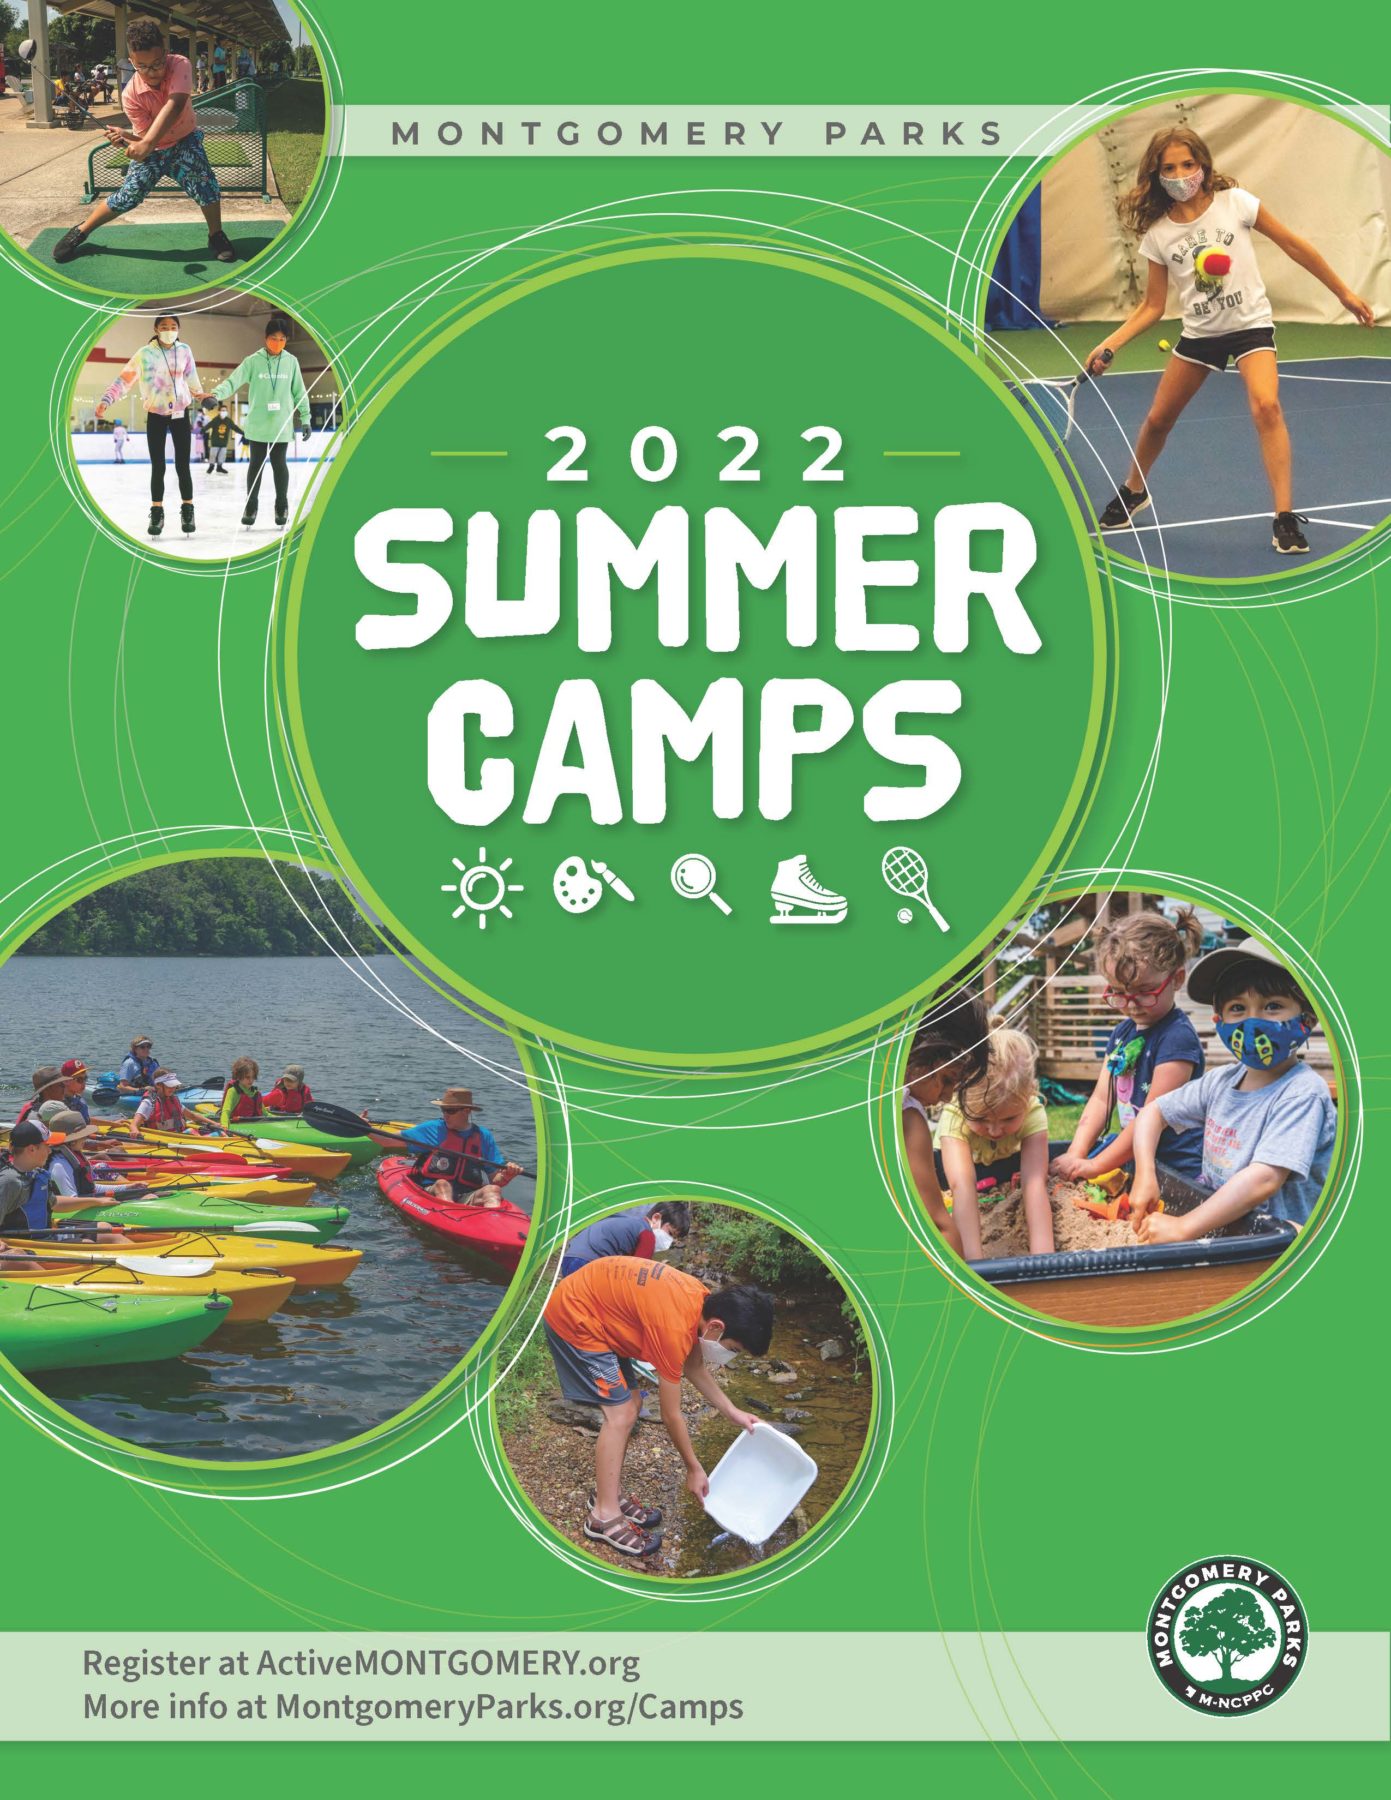 Image of the front cover of the summer camp guide